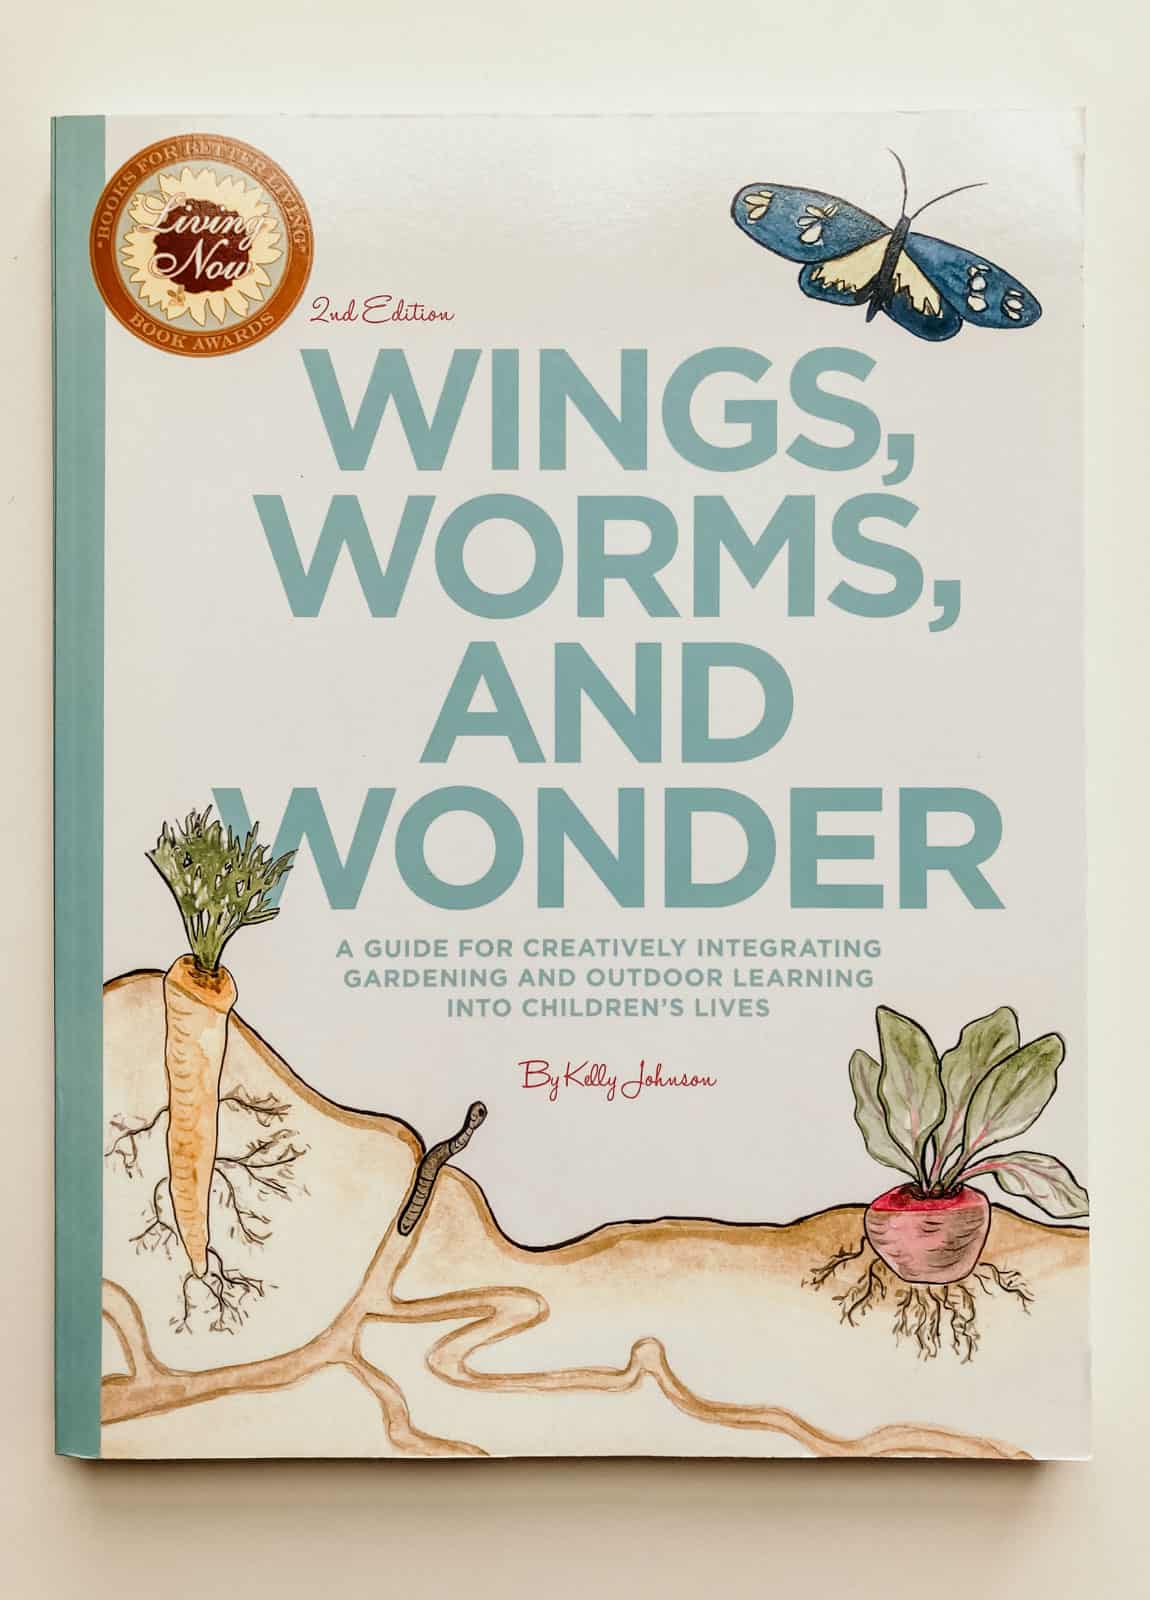 Cover of Wings, Worms, and Wonder by Kelly Johnson